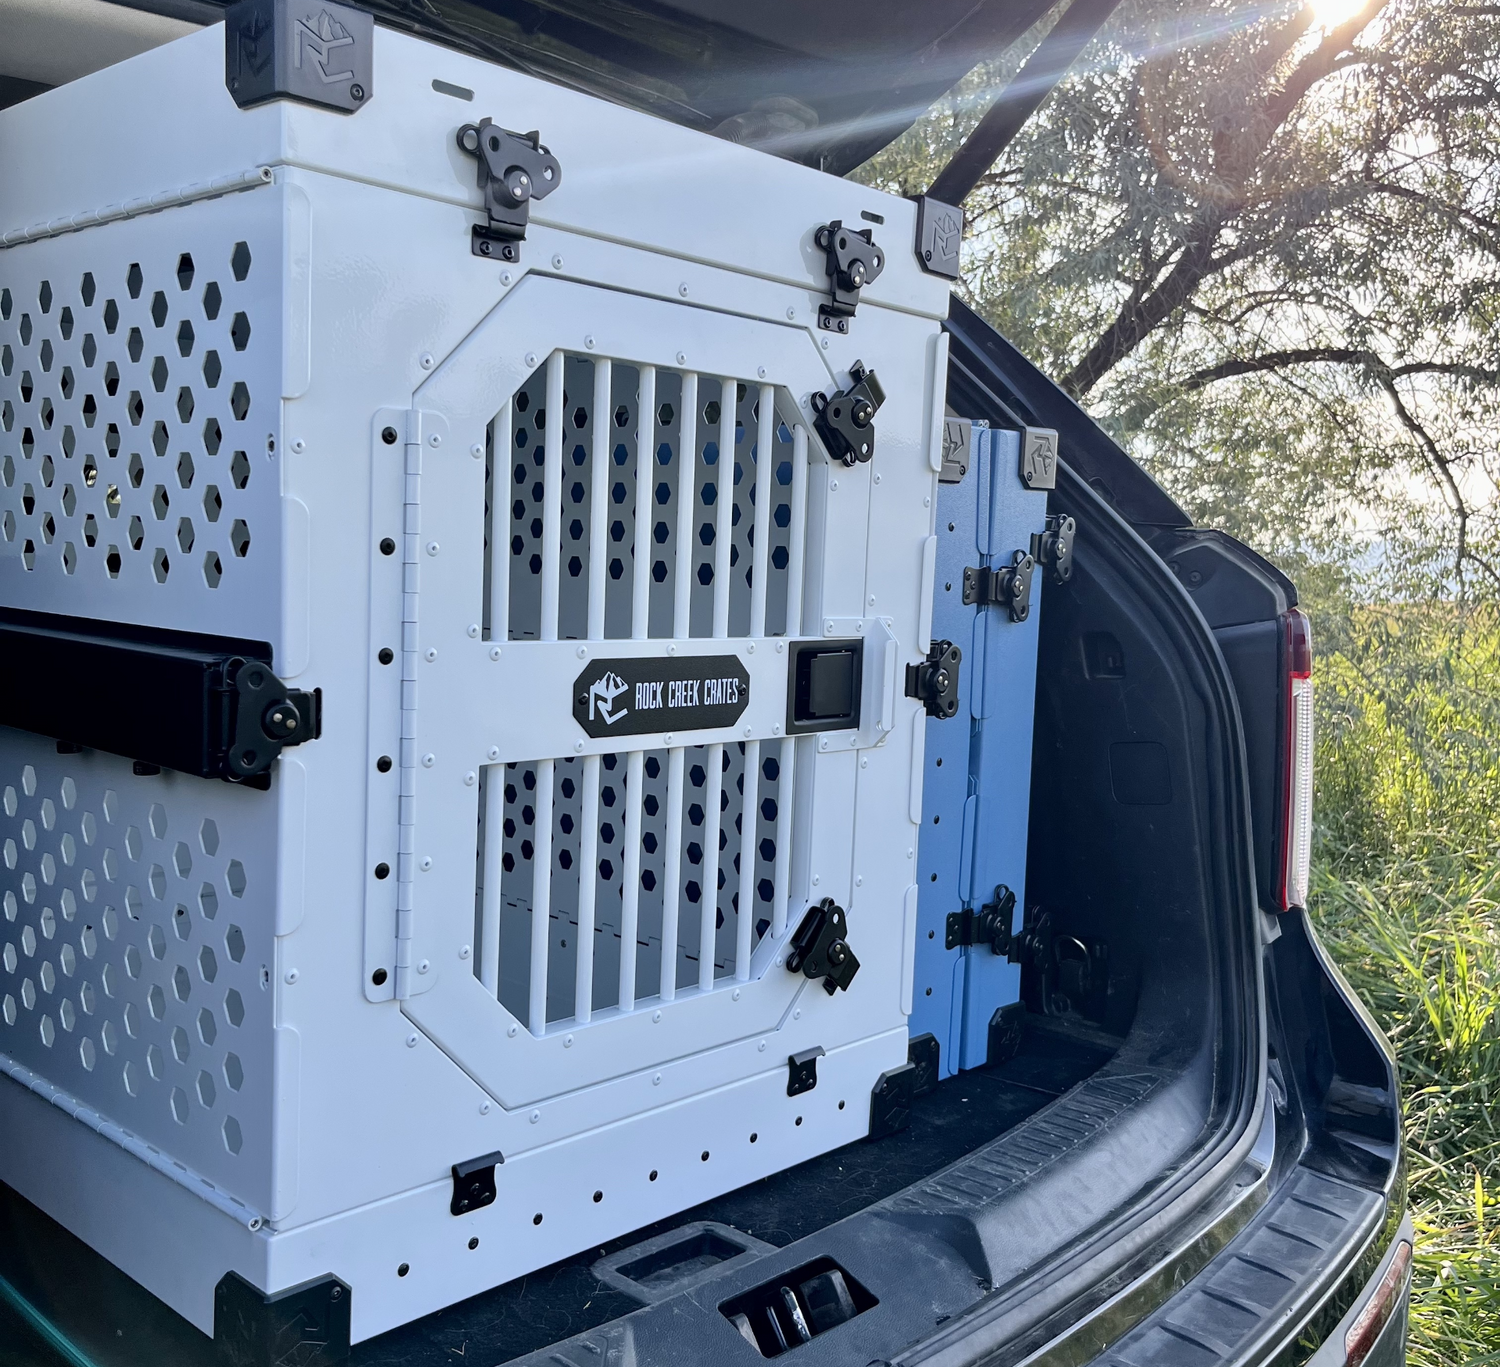 2 collapsible dog crates by Rock Creek Crates shown in the back of an SUV